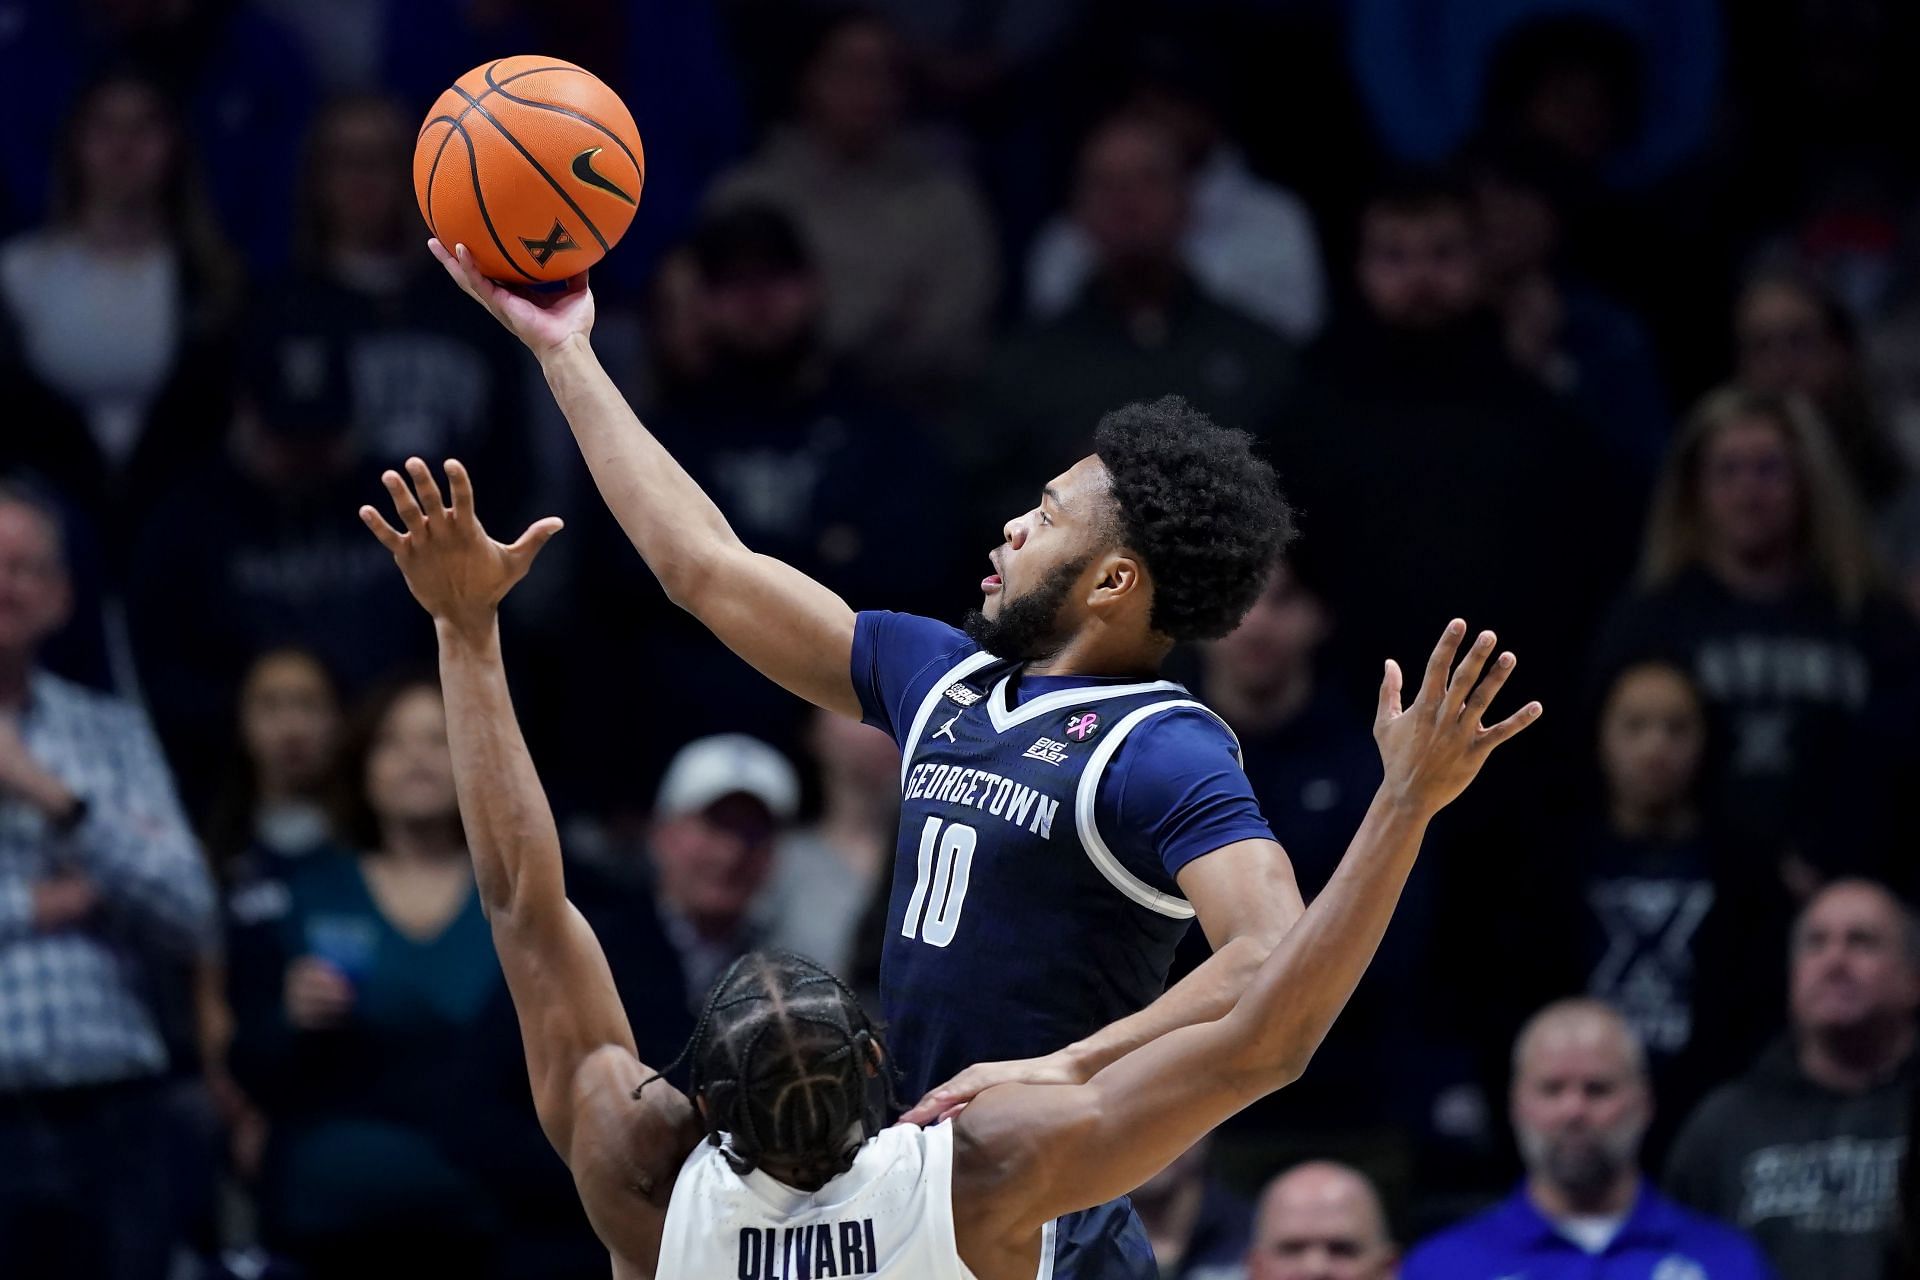 Georgetown, and standout guard Jayden Epps, will have a tough task hosting UConn.